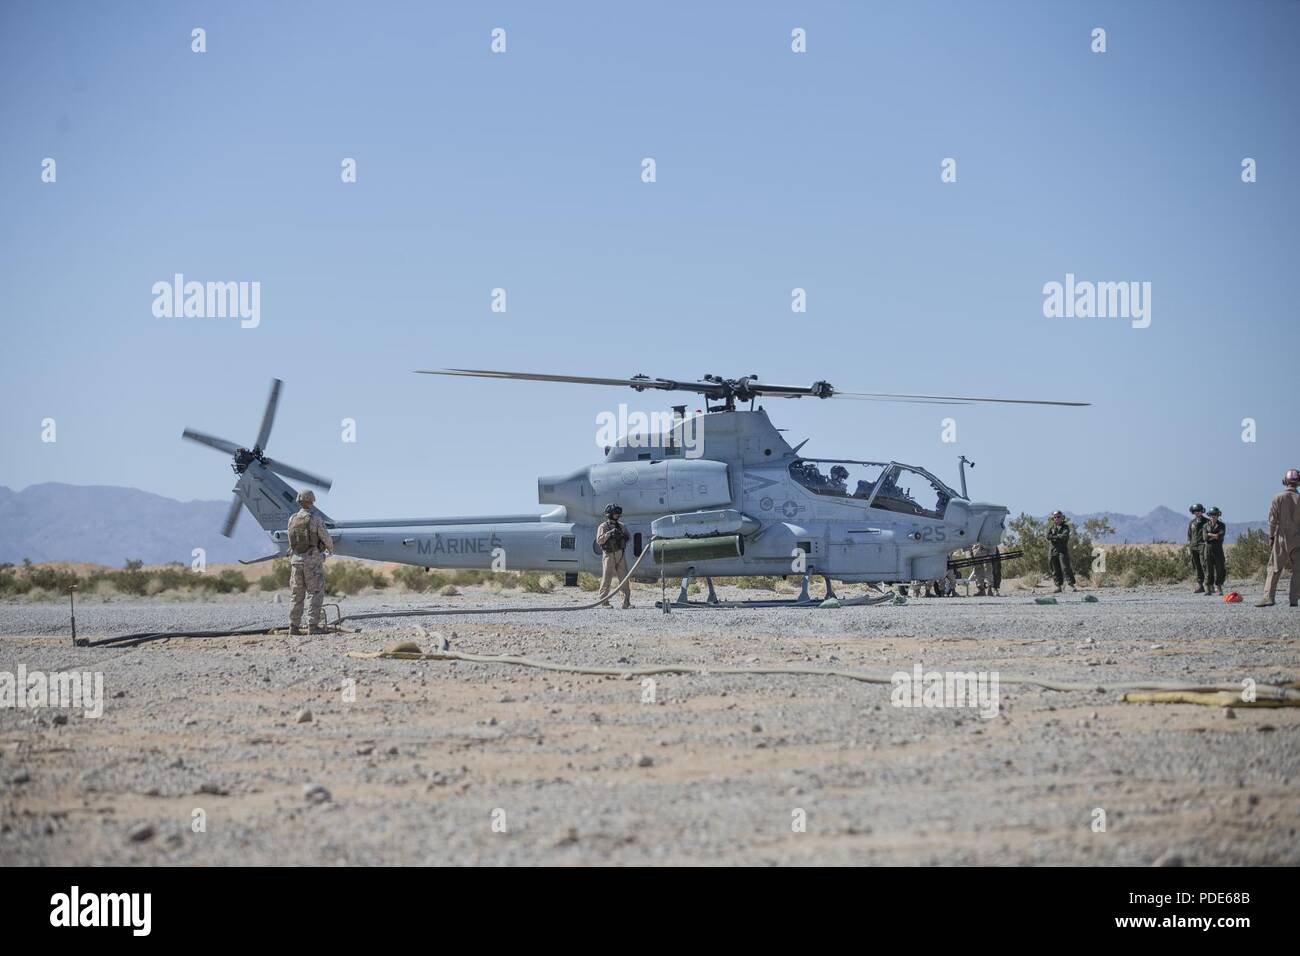 U.S. Marines with Marine Light Attack Helicopter Squadron 367 fuel an AH-1Z Super Cobra during Integrated Training Exercise (ITX) 3-18 aboard Marine Corps Air Ground Combat Center, Twentynine Palms, Calif., May 14, 2018. ITX is a large-scale, combined-arms training exercise intended to produce combat-ready forces capable of operating as an integrated Marine air-ground task force. Stock Photo